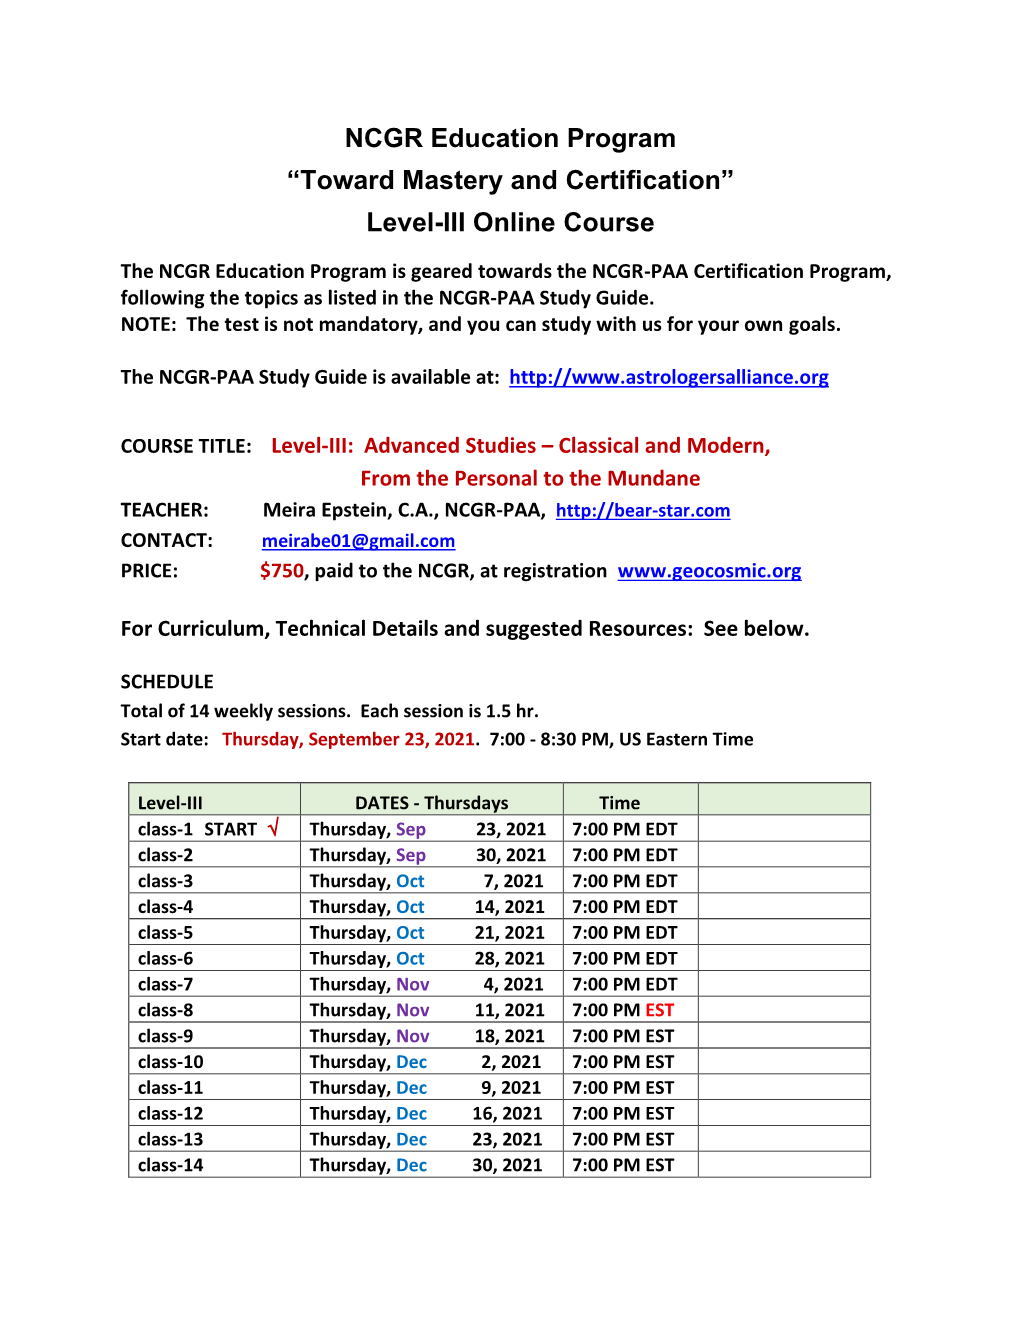 NCGR Education Program “Toward Mastery and Certification” Level-III